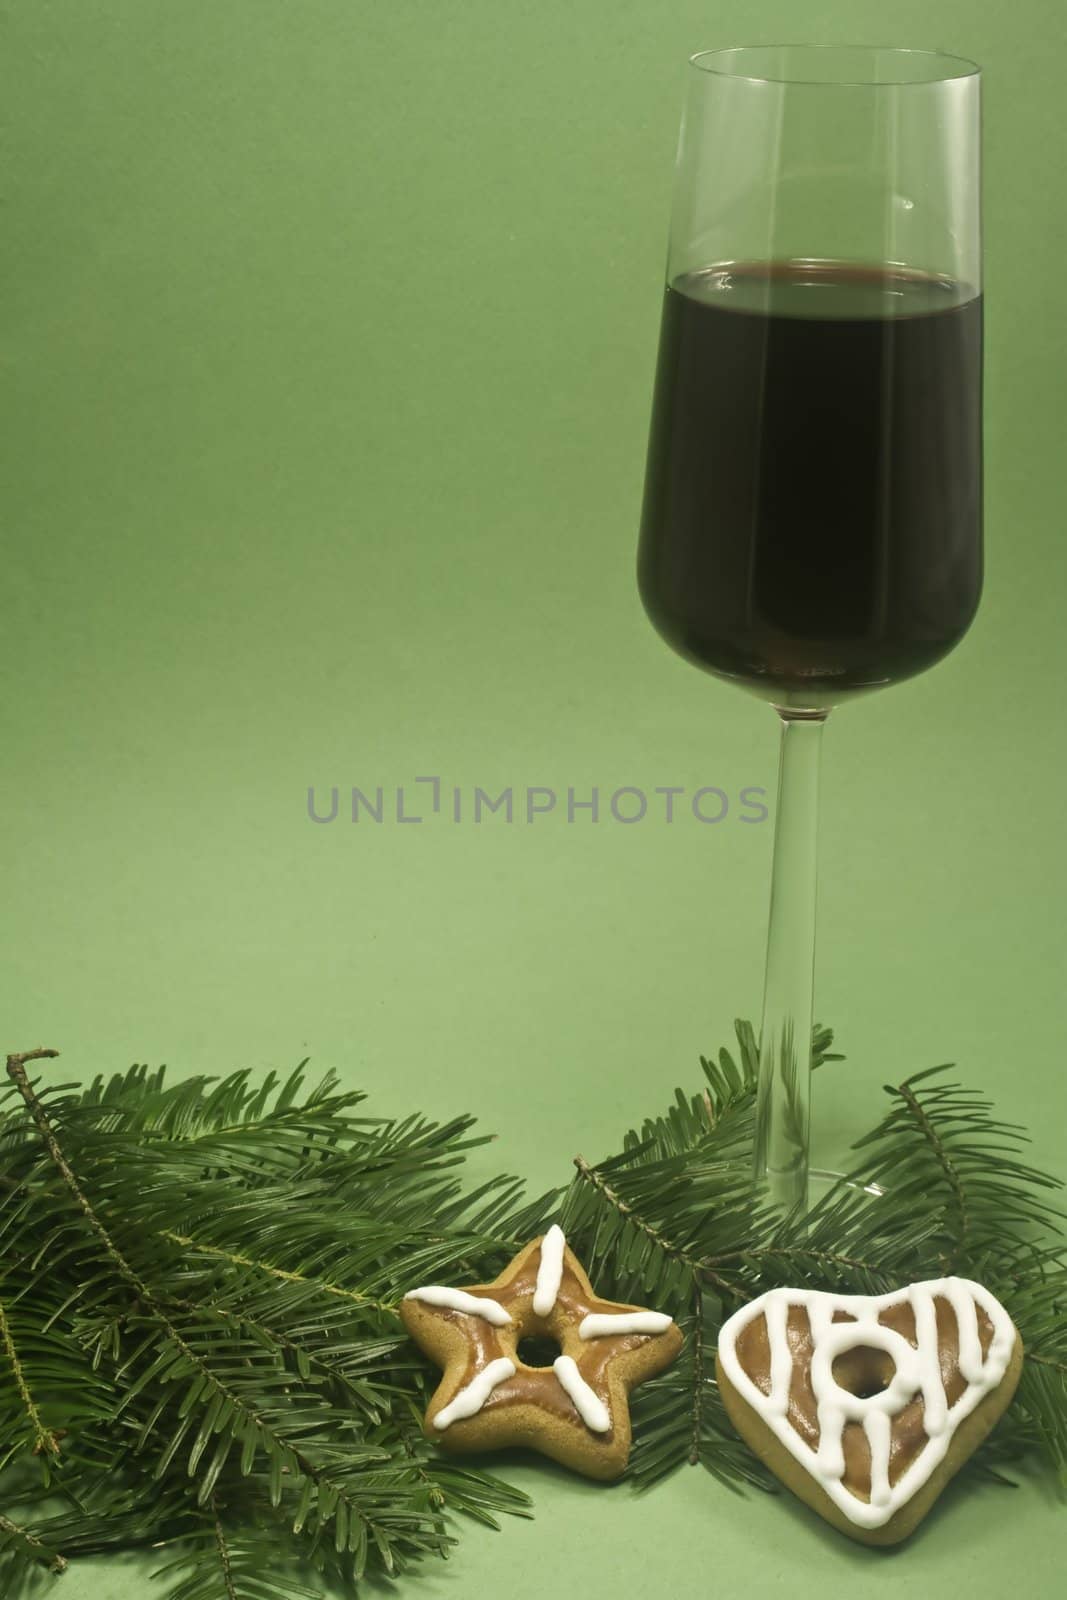 A glass of red wine and two cookies on a fir branch isolated on green paper